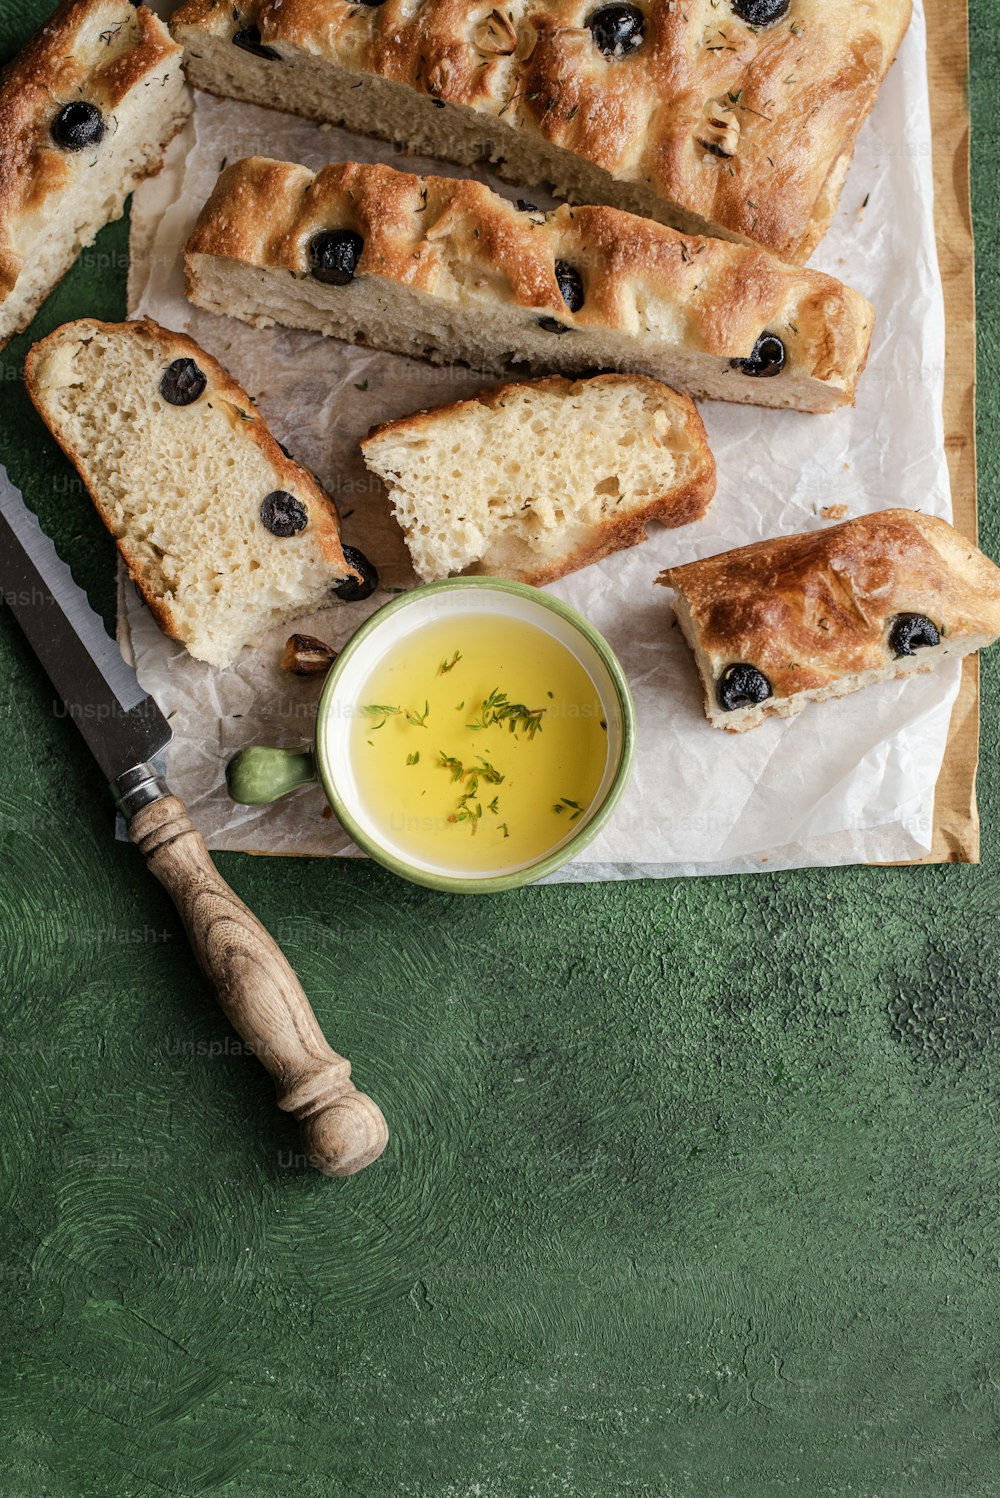 a loaf of bread with olives and a bowl of olive oil